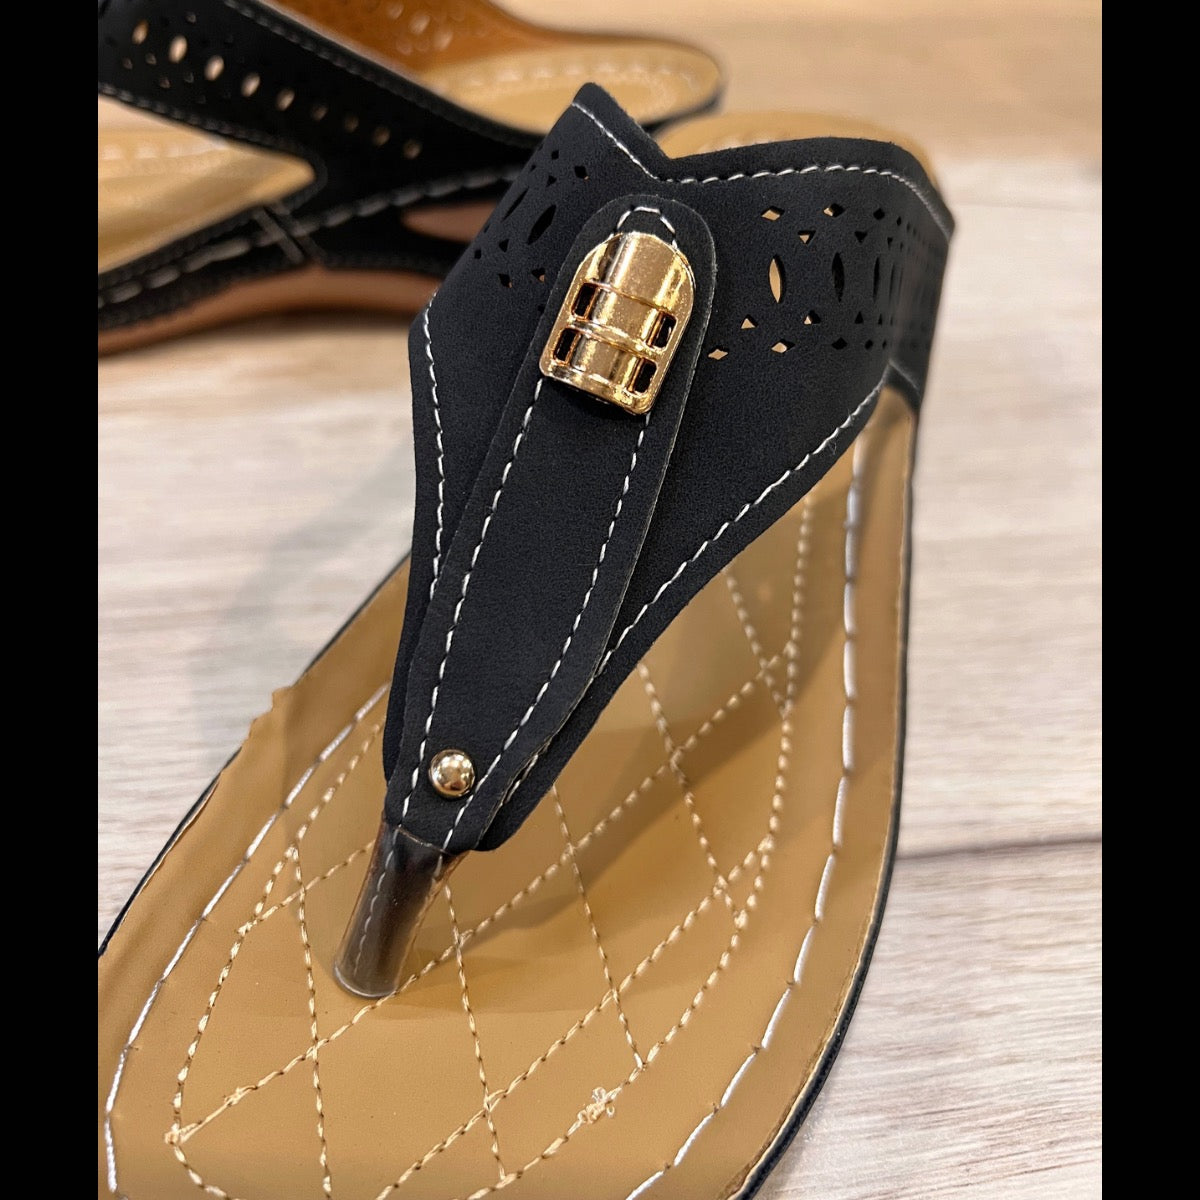 BLACK GOLD LOW WEDGE LIGHTWEIGHT SANDALS WITH TOE POST